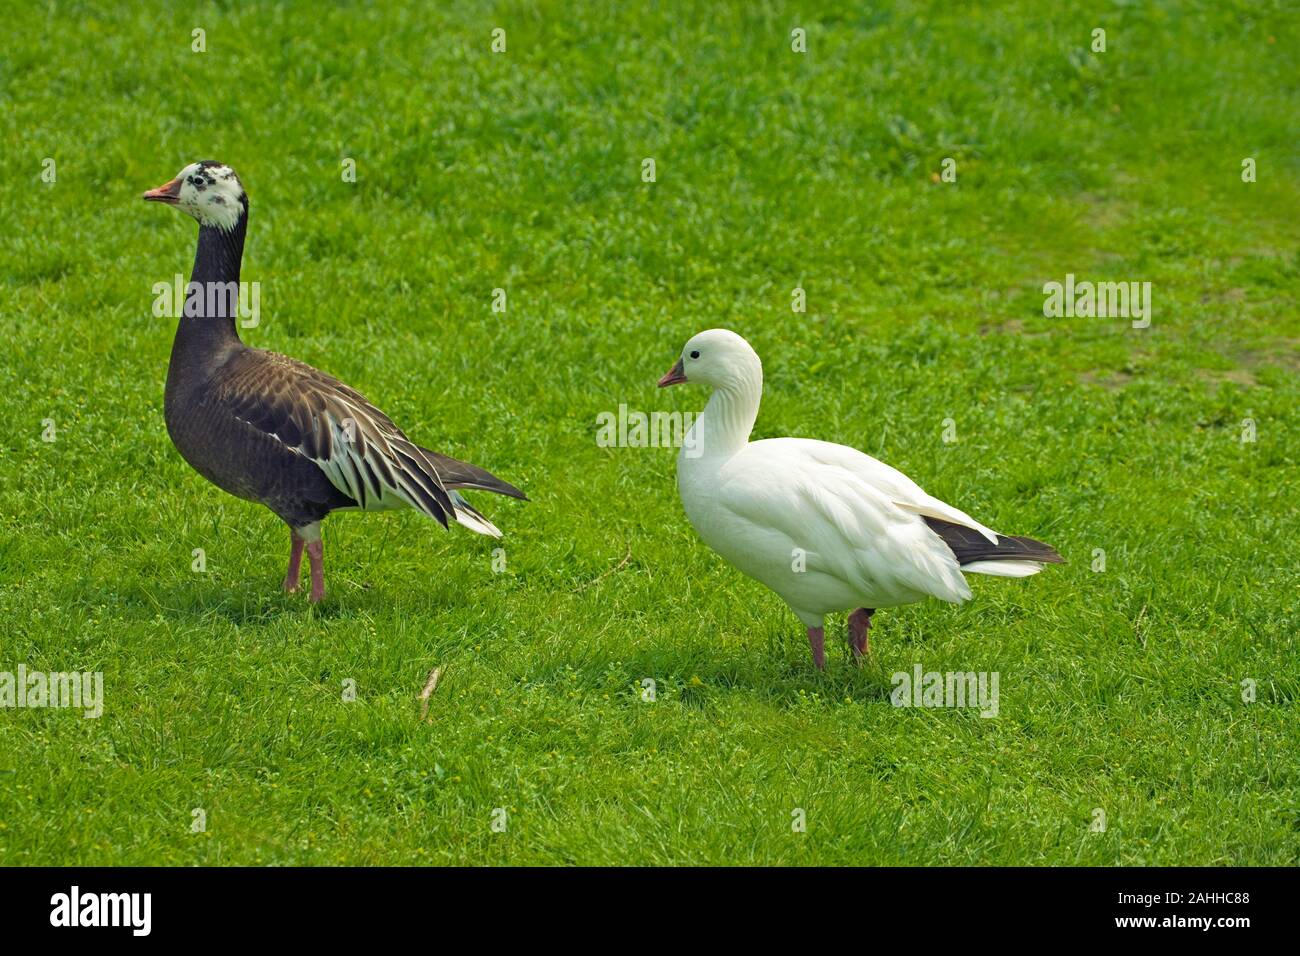 ROSS'S GOOSE (Anser rossi) Rare 'blue' phase left. Goslings may be white or 'blue' but usually both moult out to assume white plumage once  adult. Stock Photo